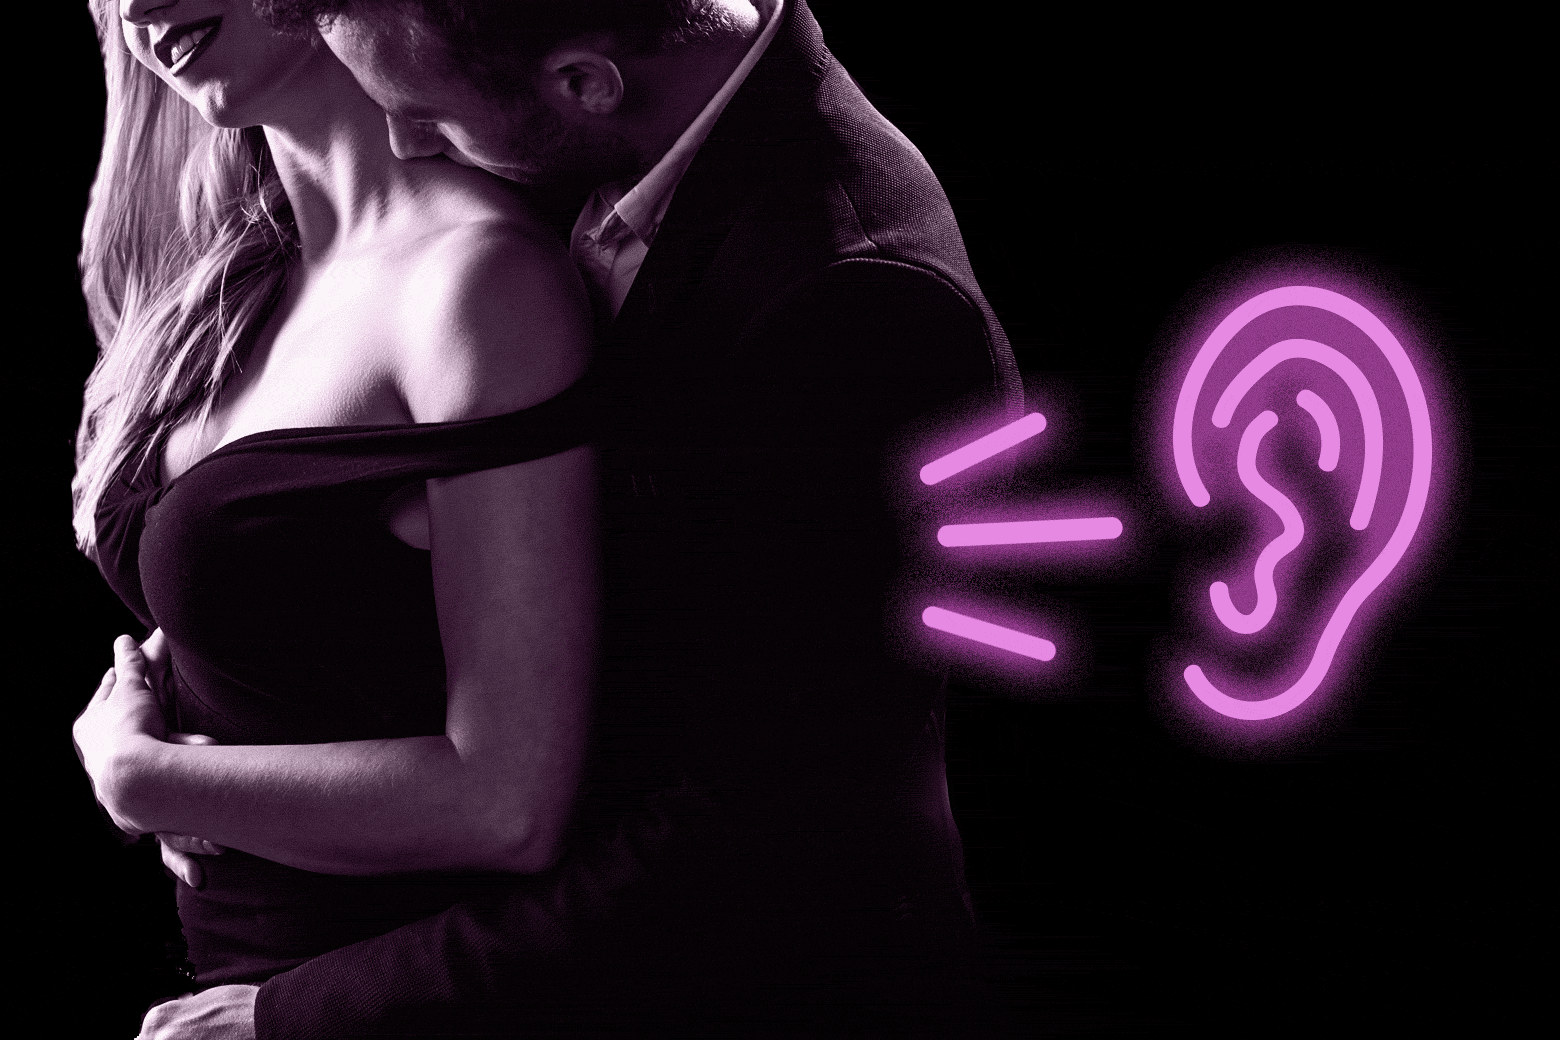 A couple getting it on, making noise that's getting picked up by a glowing neon ear.